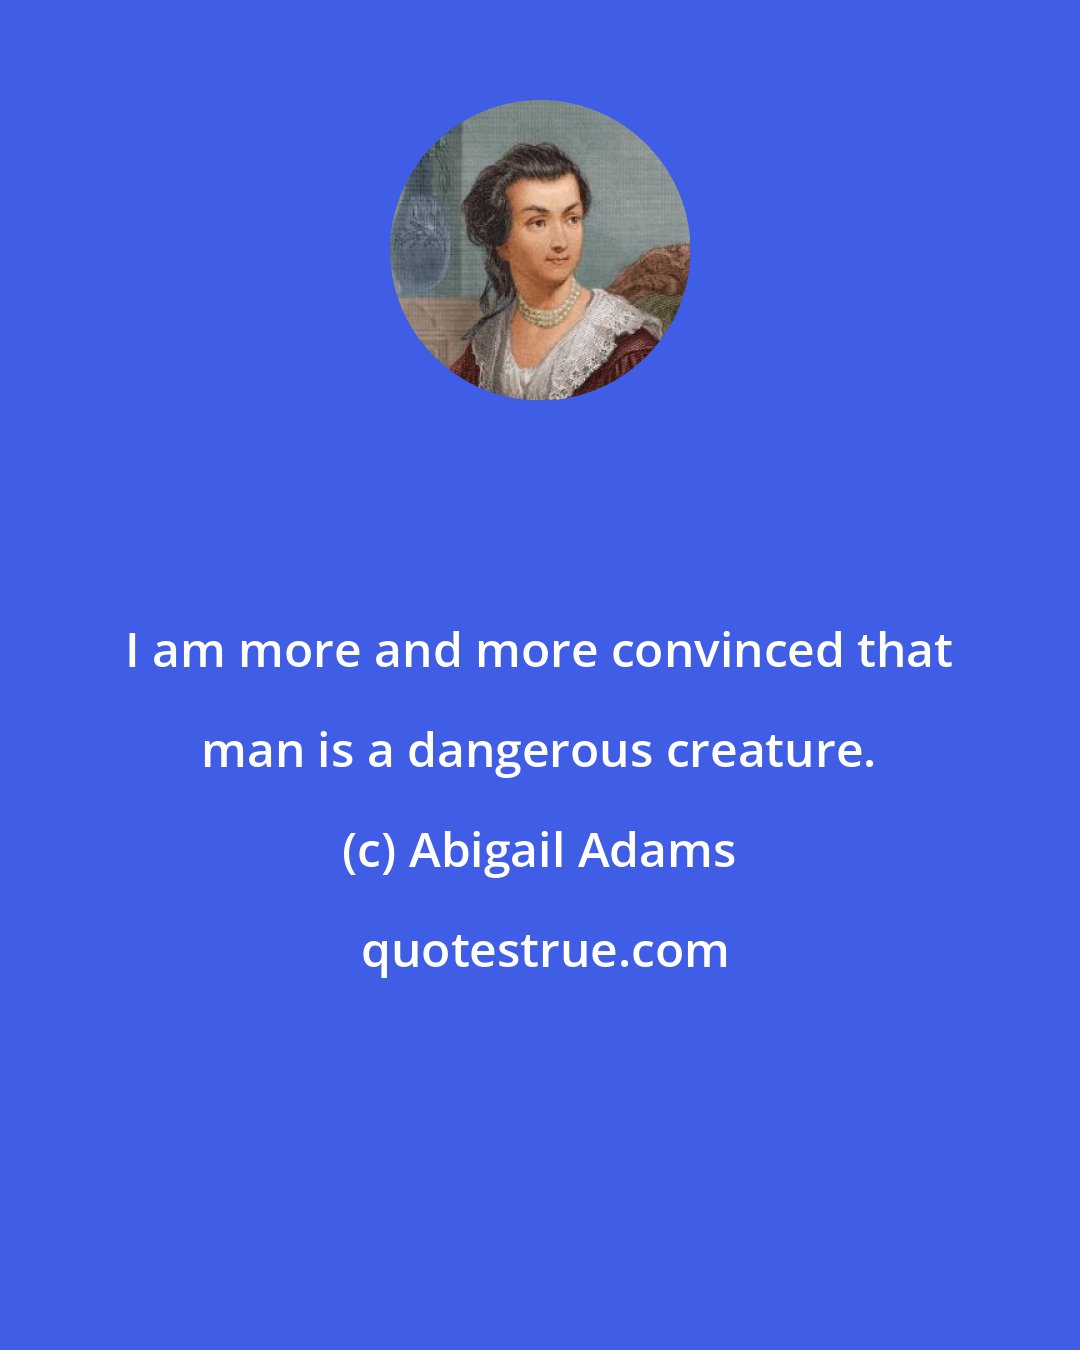 Abigail Adams: I am more and more convinced that man is a dangerous creature.